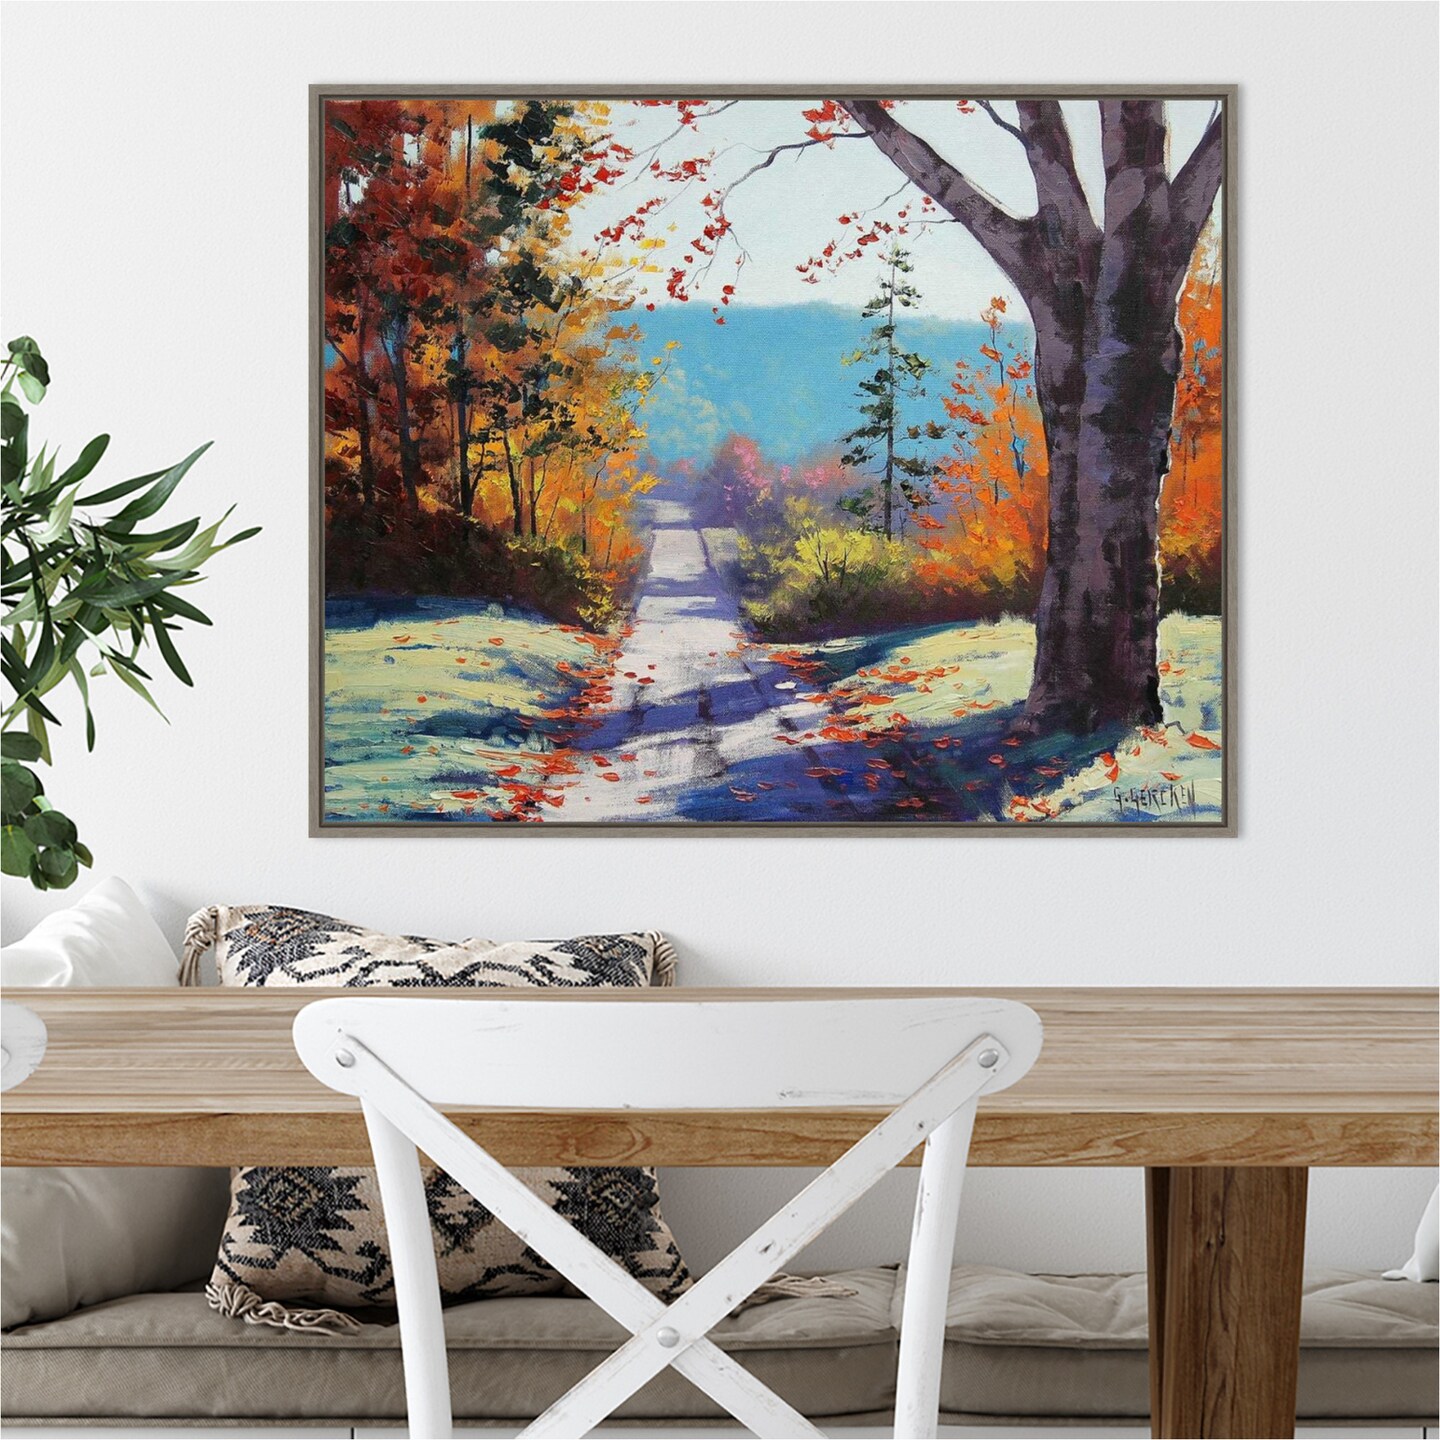 Autumn Delight by Graham Gercken 28-in. W x 23-in. H. Canvas Wall Art Print Framed in Grey